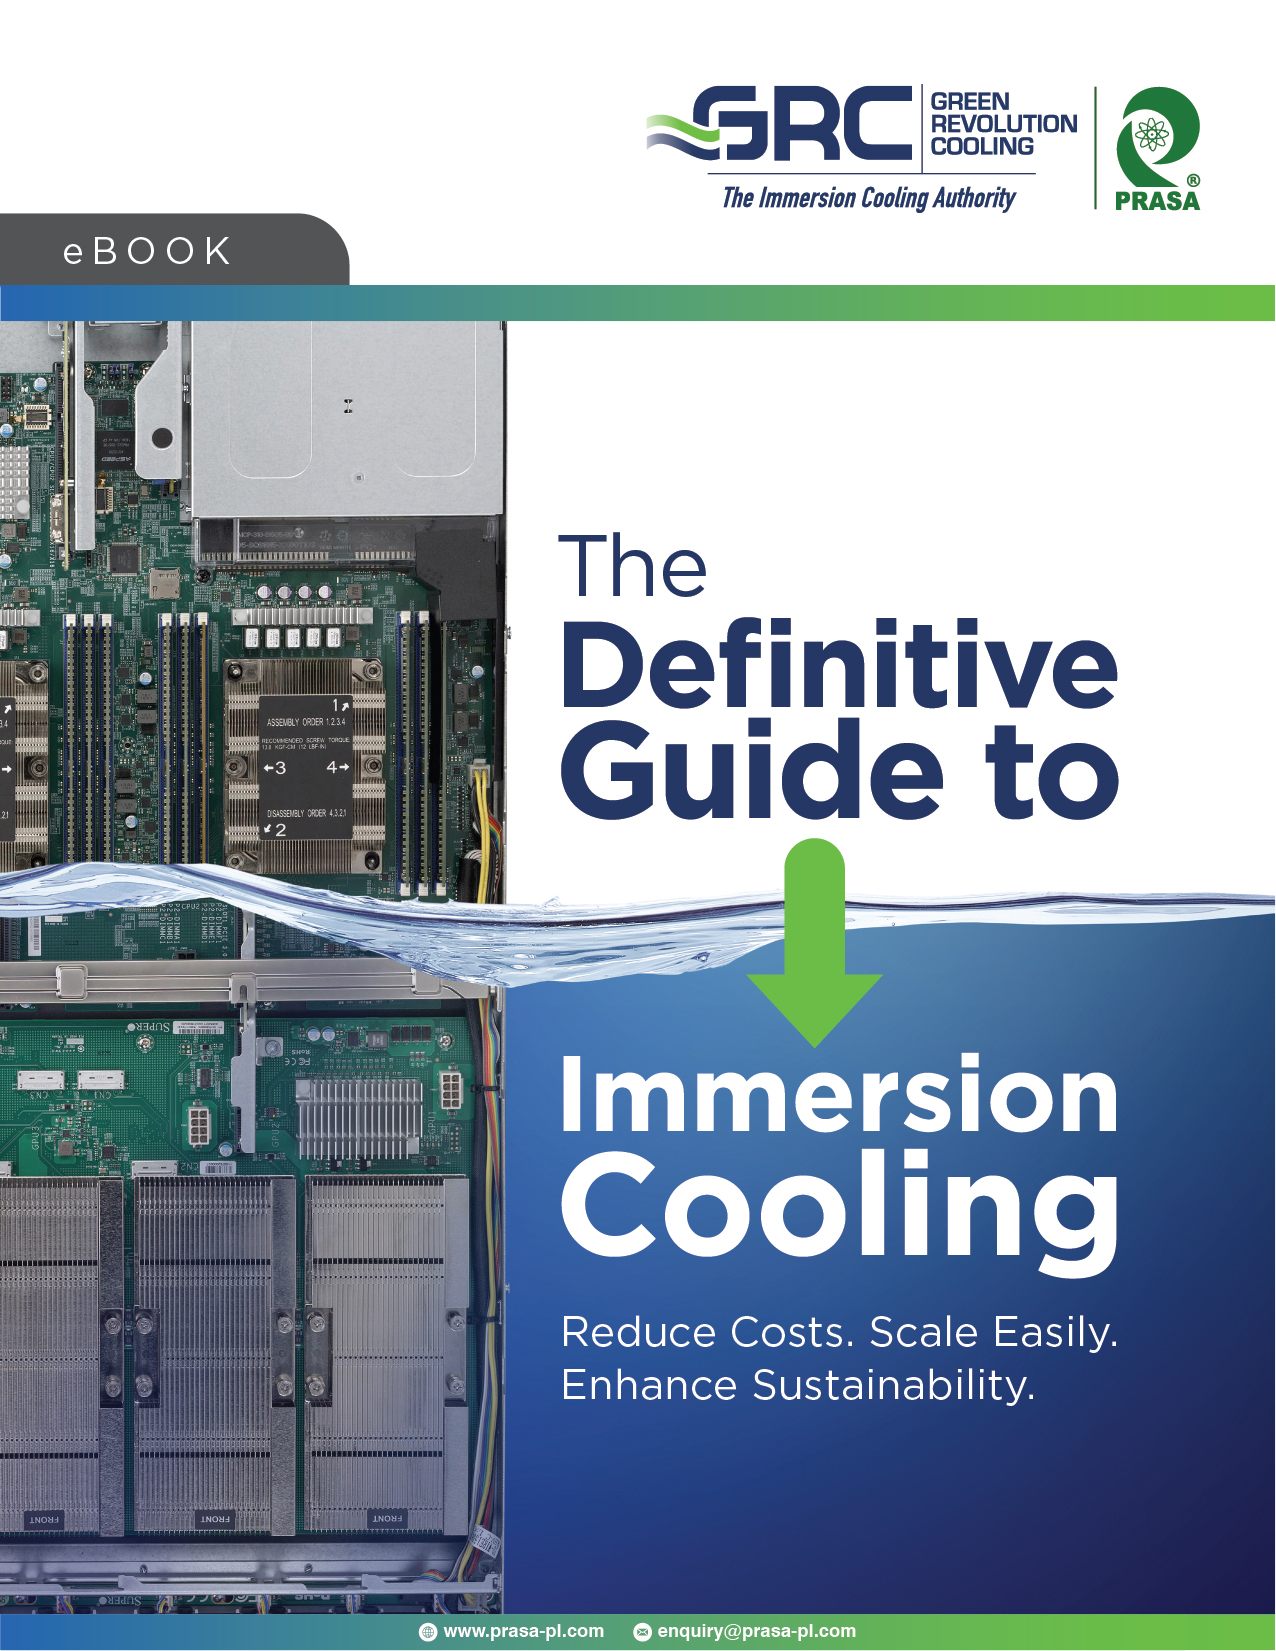 PRASA | GRC :-The Definitive Guide to Immersion Cooling